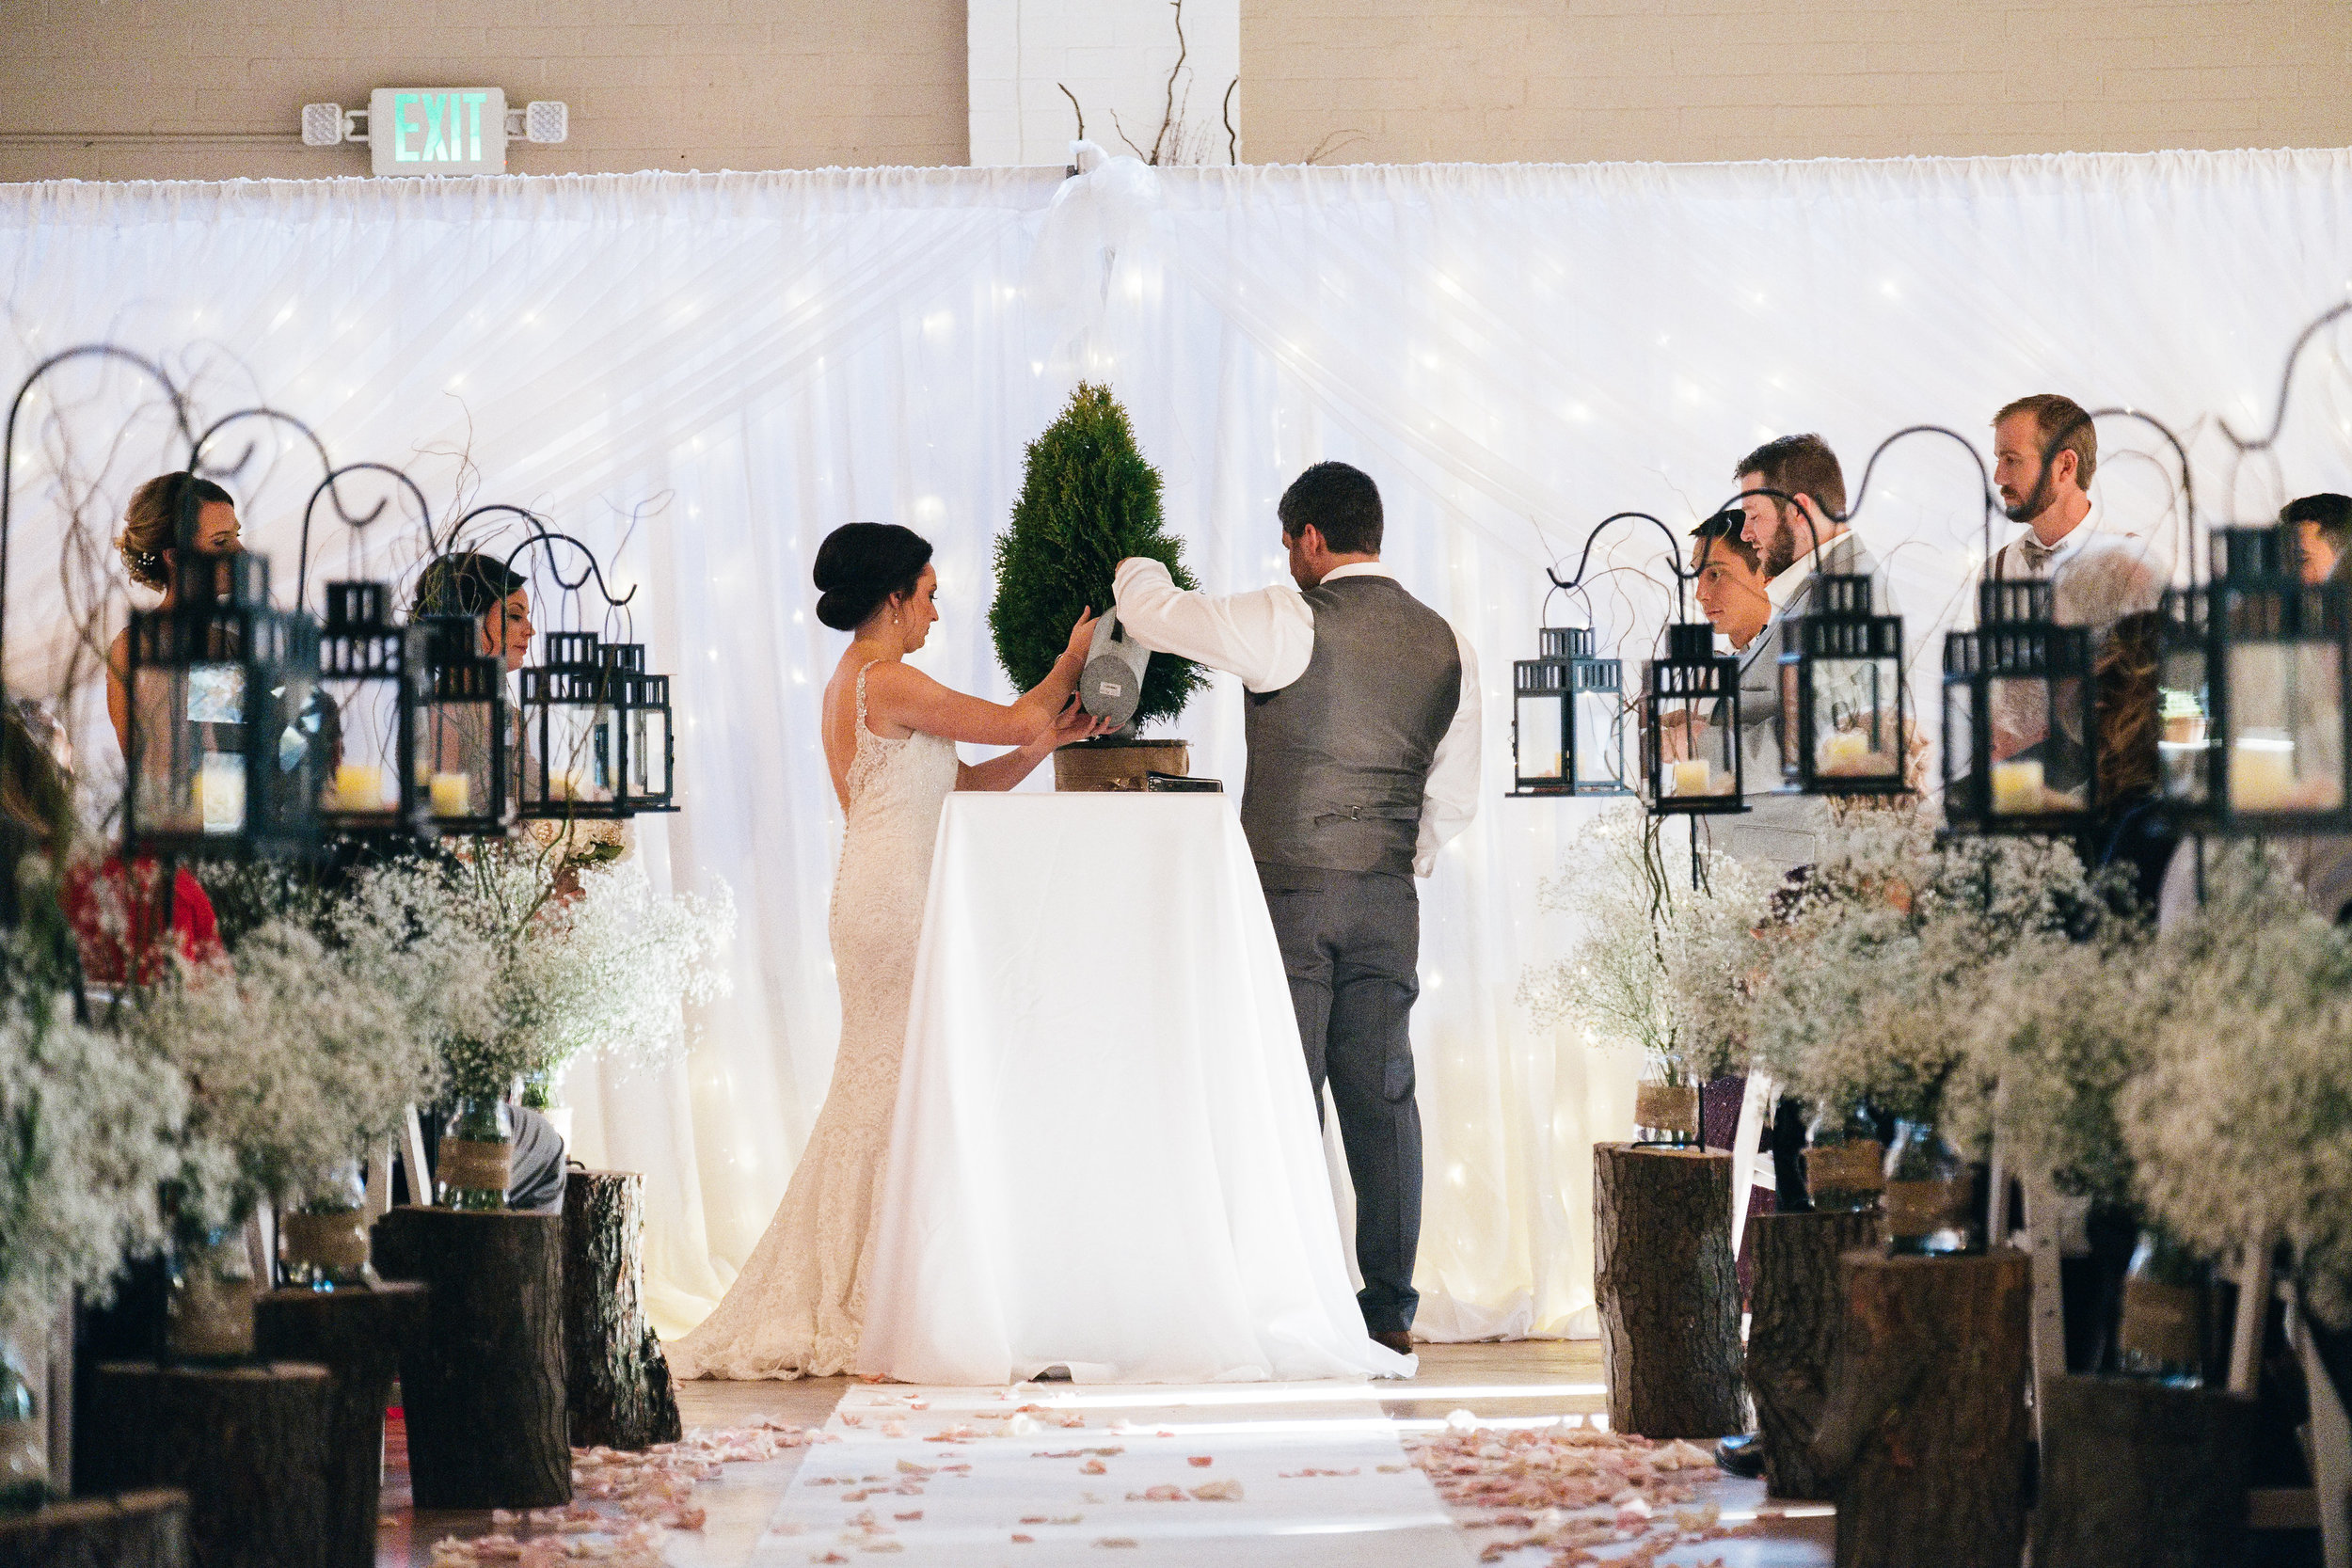 9 Unity Ceremony Ideas For Your Perfect Wedding Day